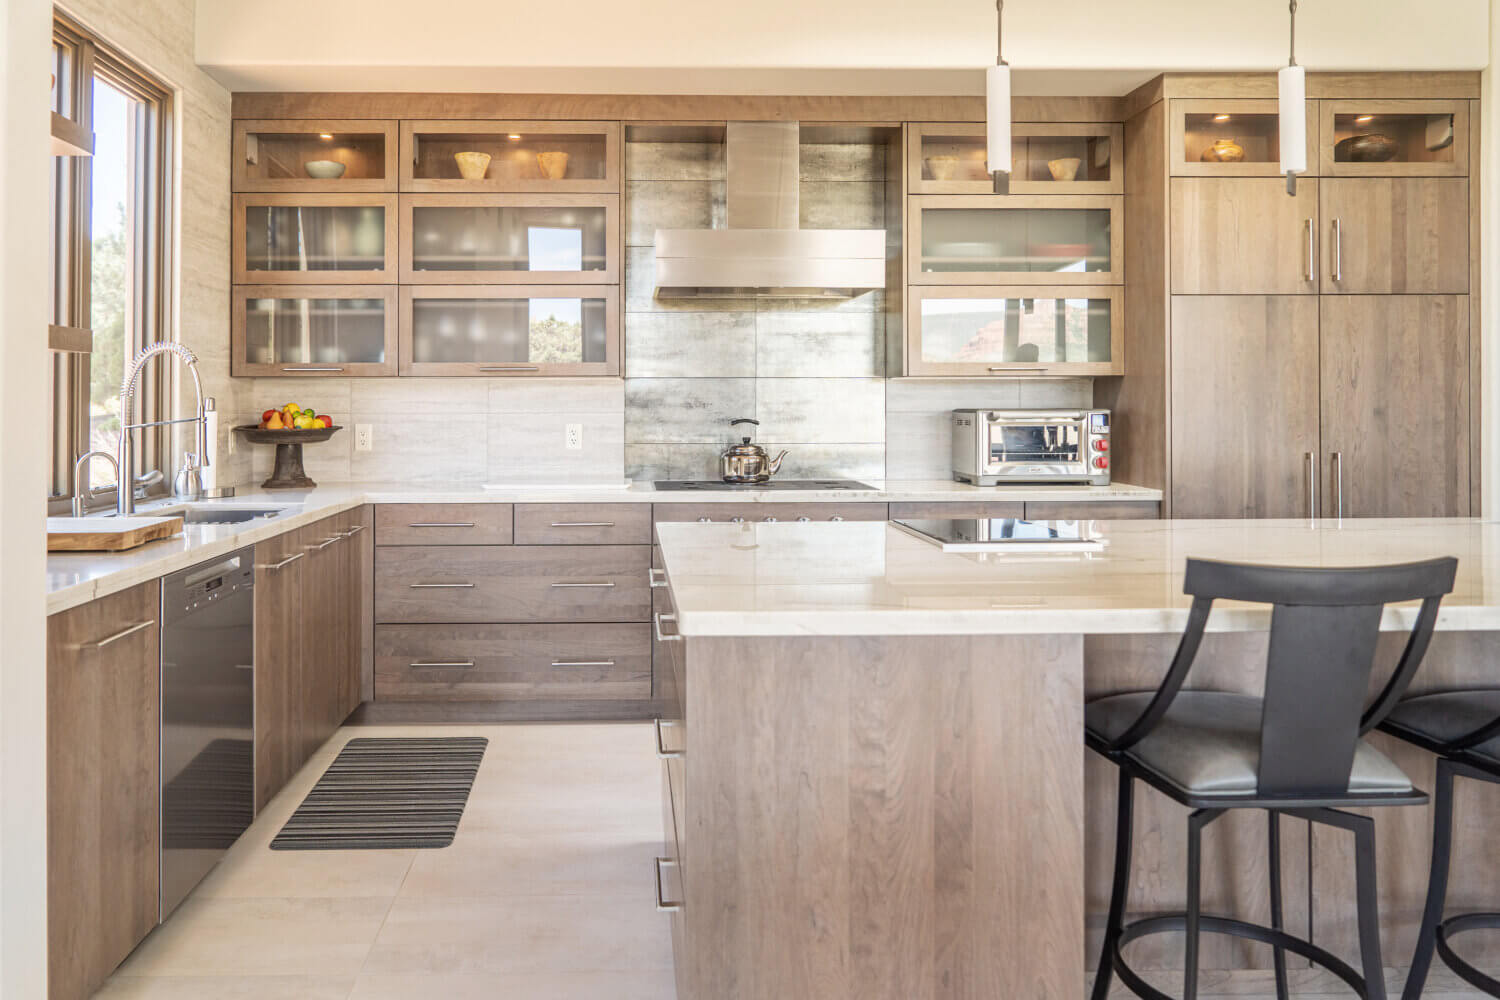 A contemporary kitchen design with gray-brown stained cabinets with slab styled doors.